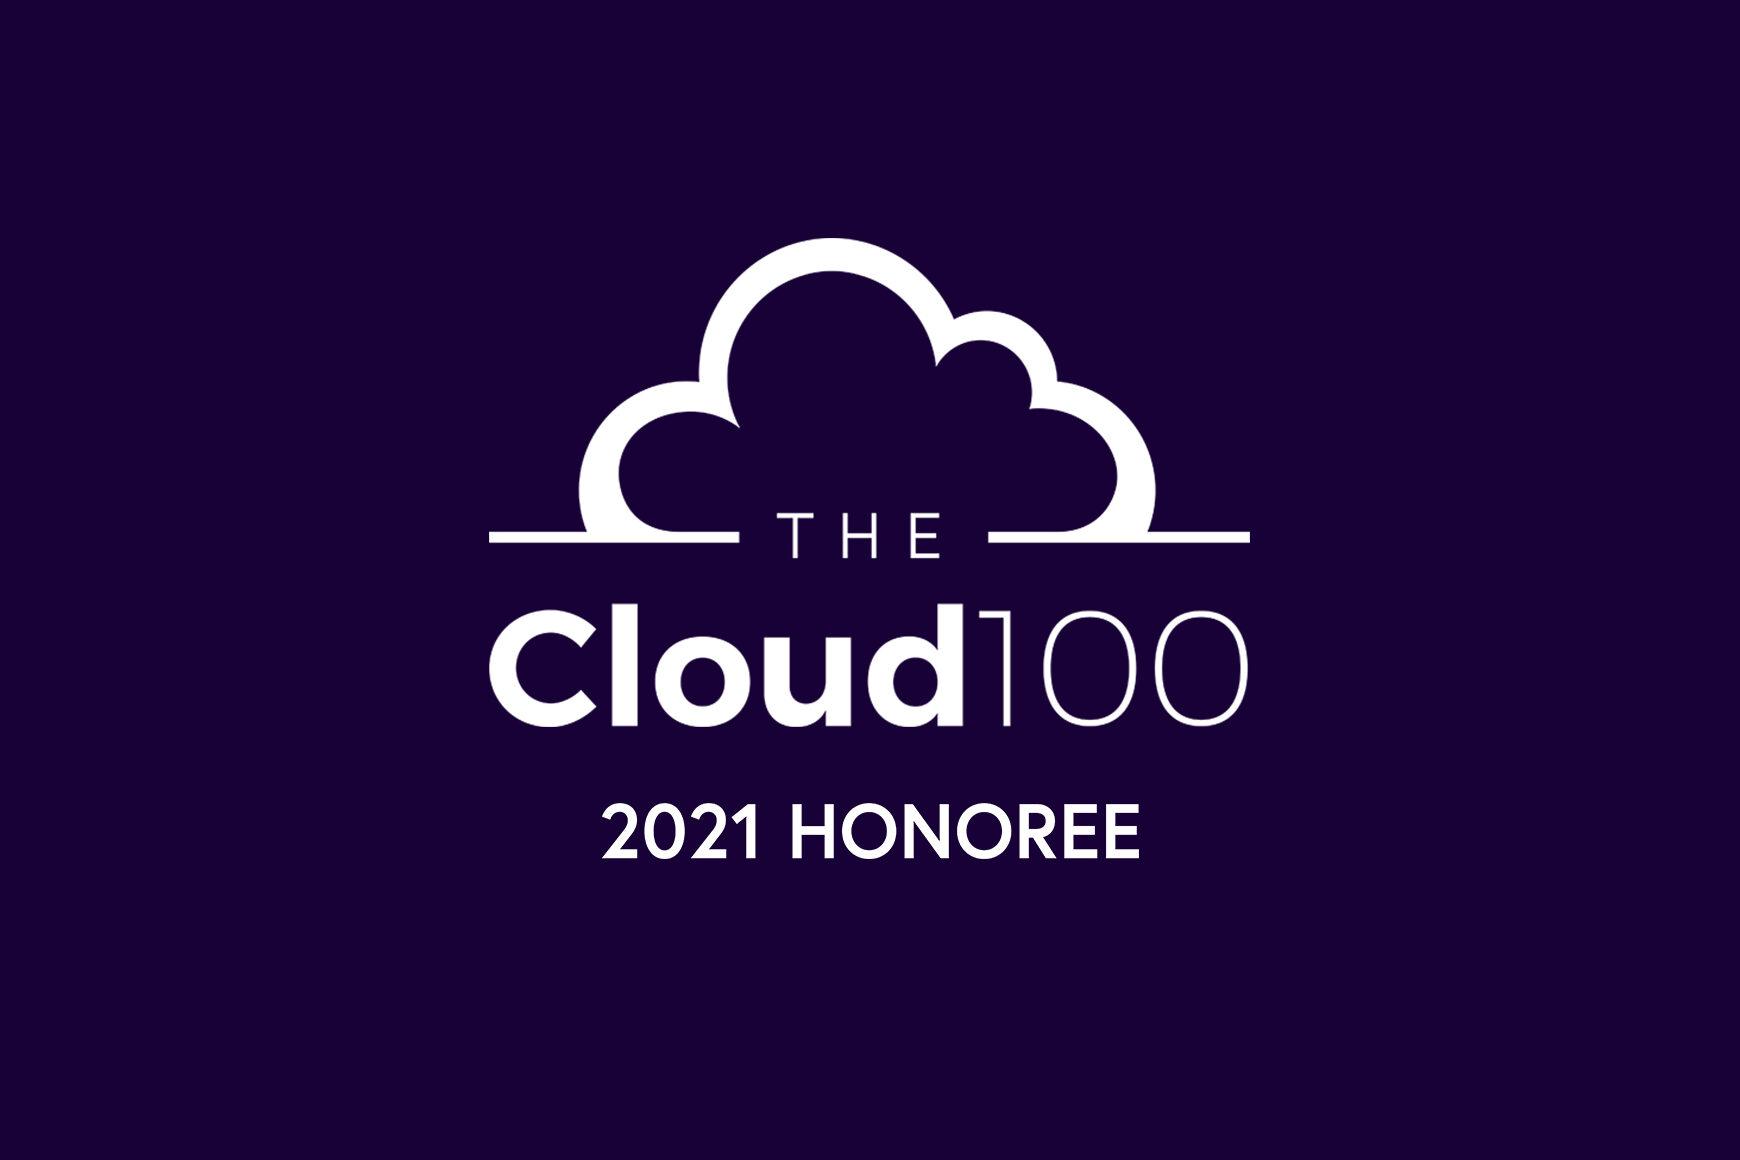 Talkdesk Jumps 36 Spots to #17 on 2021 Forbes Cloud 100 List